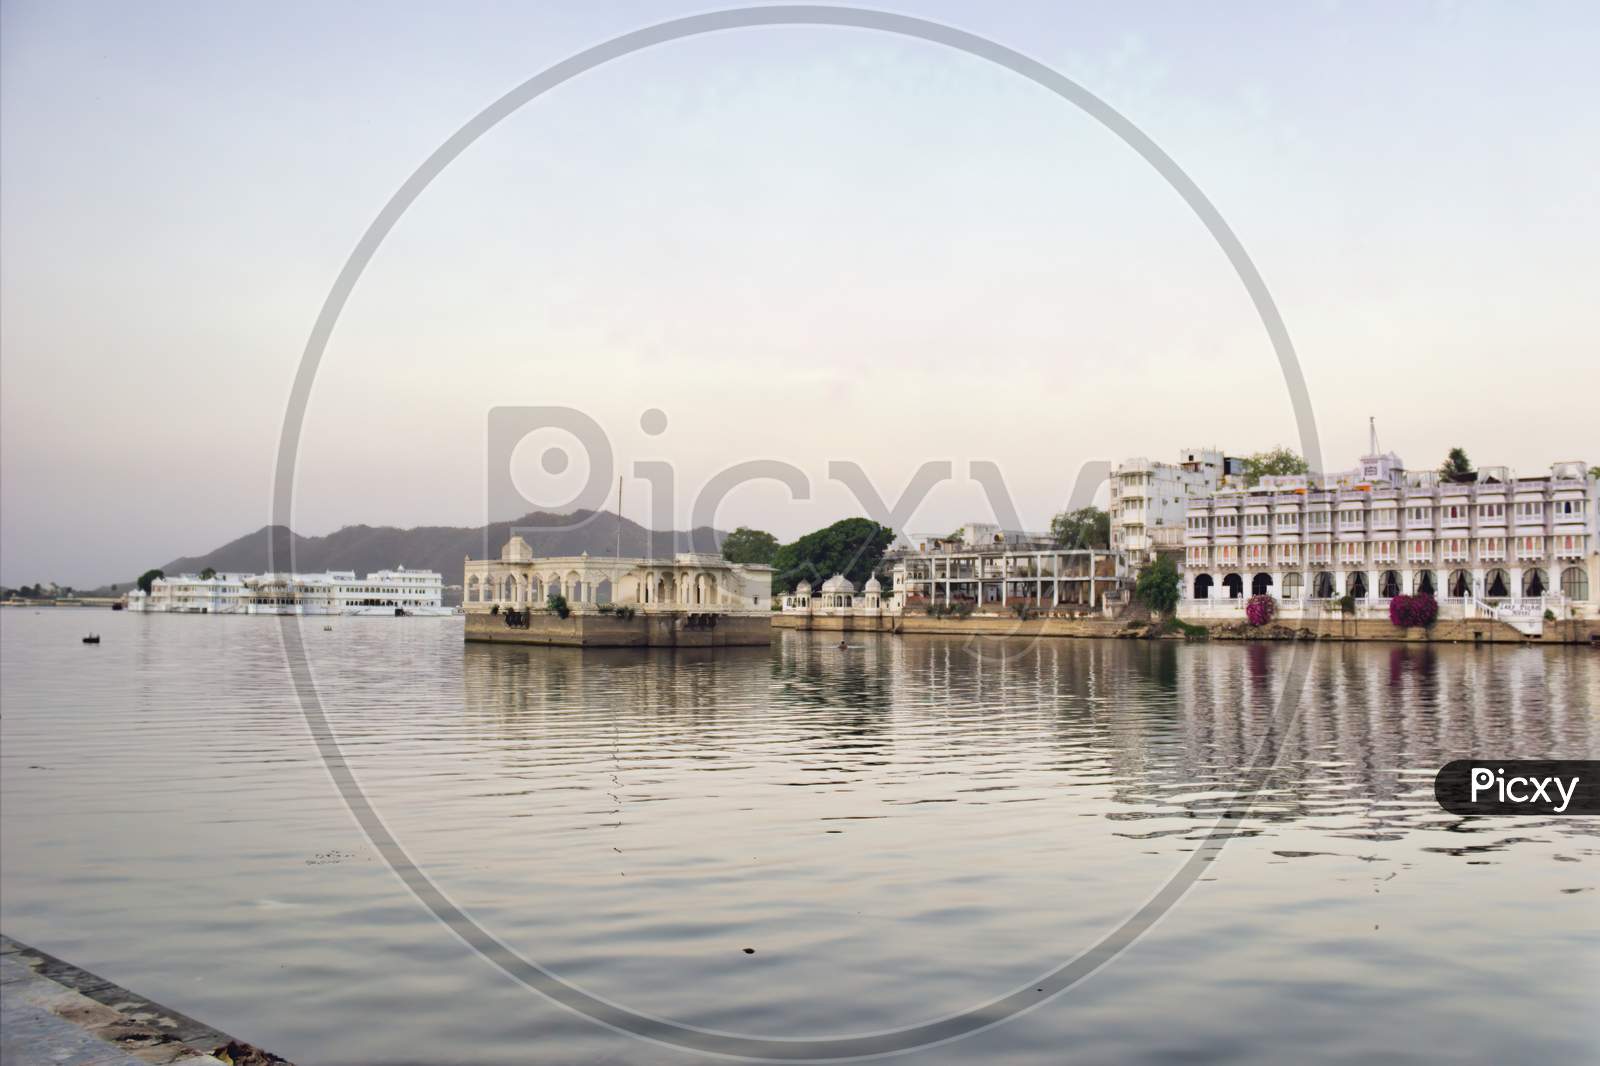 Royal Palace Built In Lake Pichola Located In Udaipur City Of Rajasthan State In India